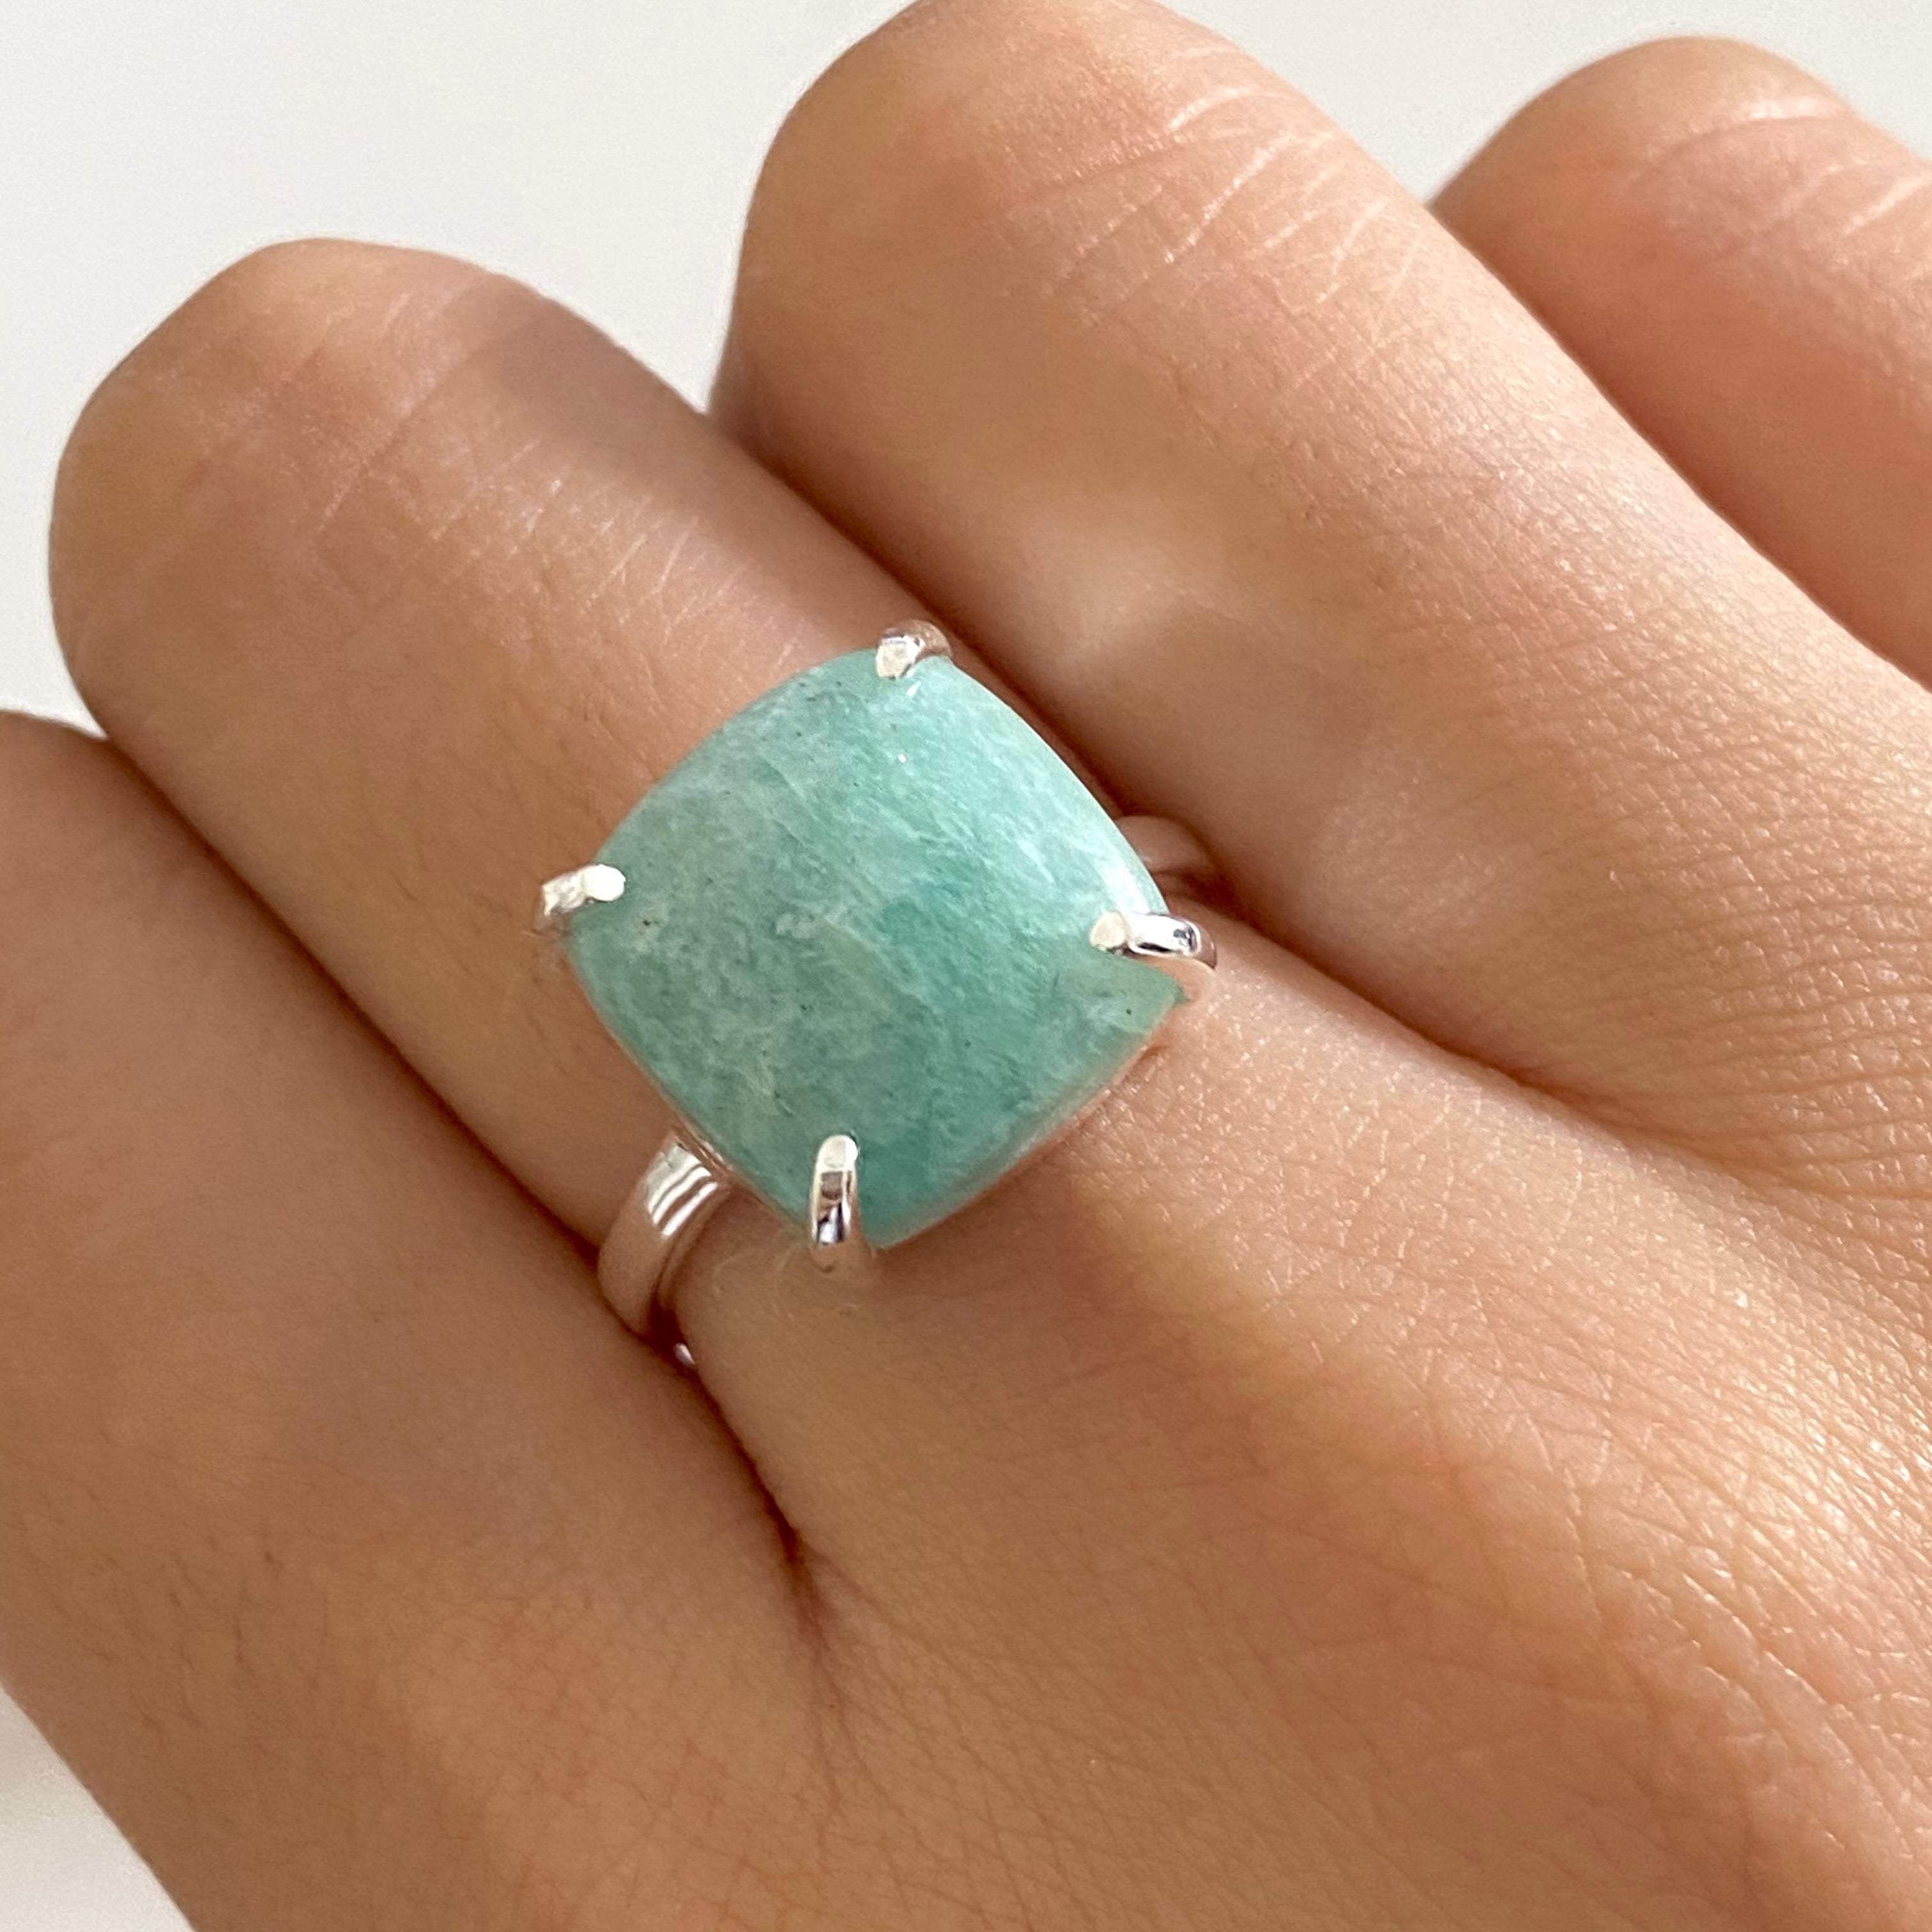 Square Cabochon Amazonite Ring in Sterling Silver